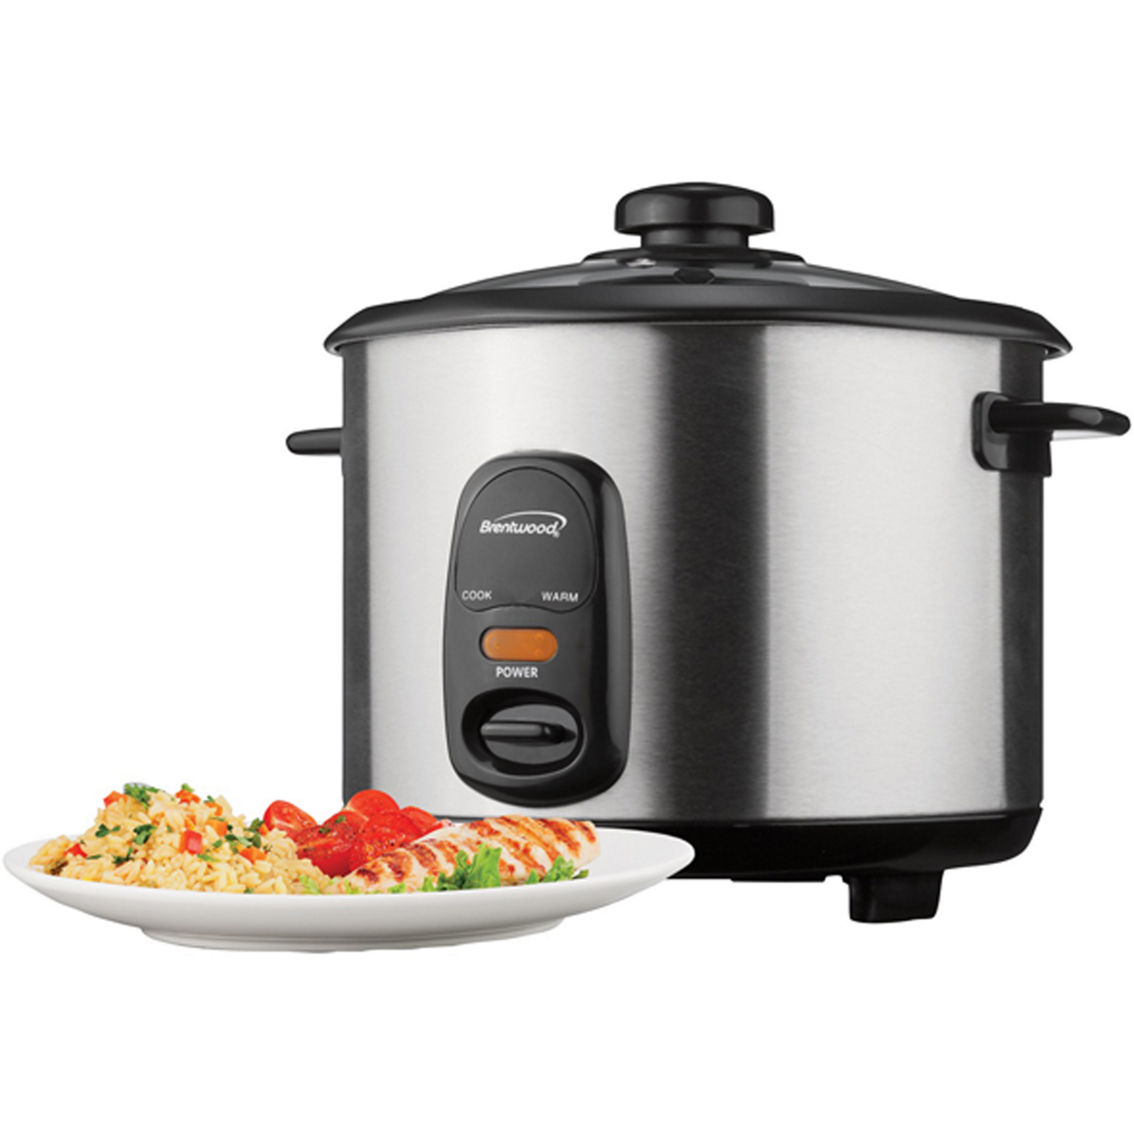 Brentwood Stainless Steel 5 Cup Rice Cooker - Image 3 of 7